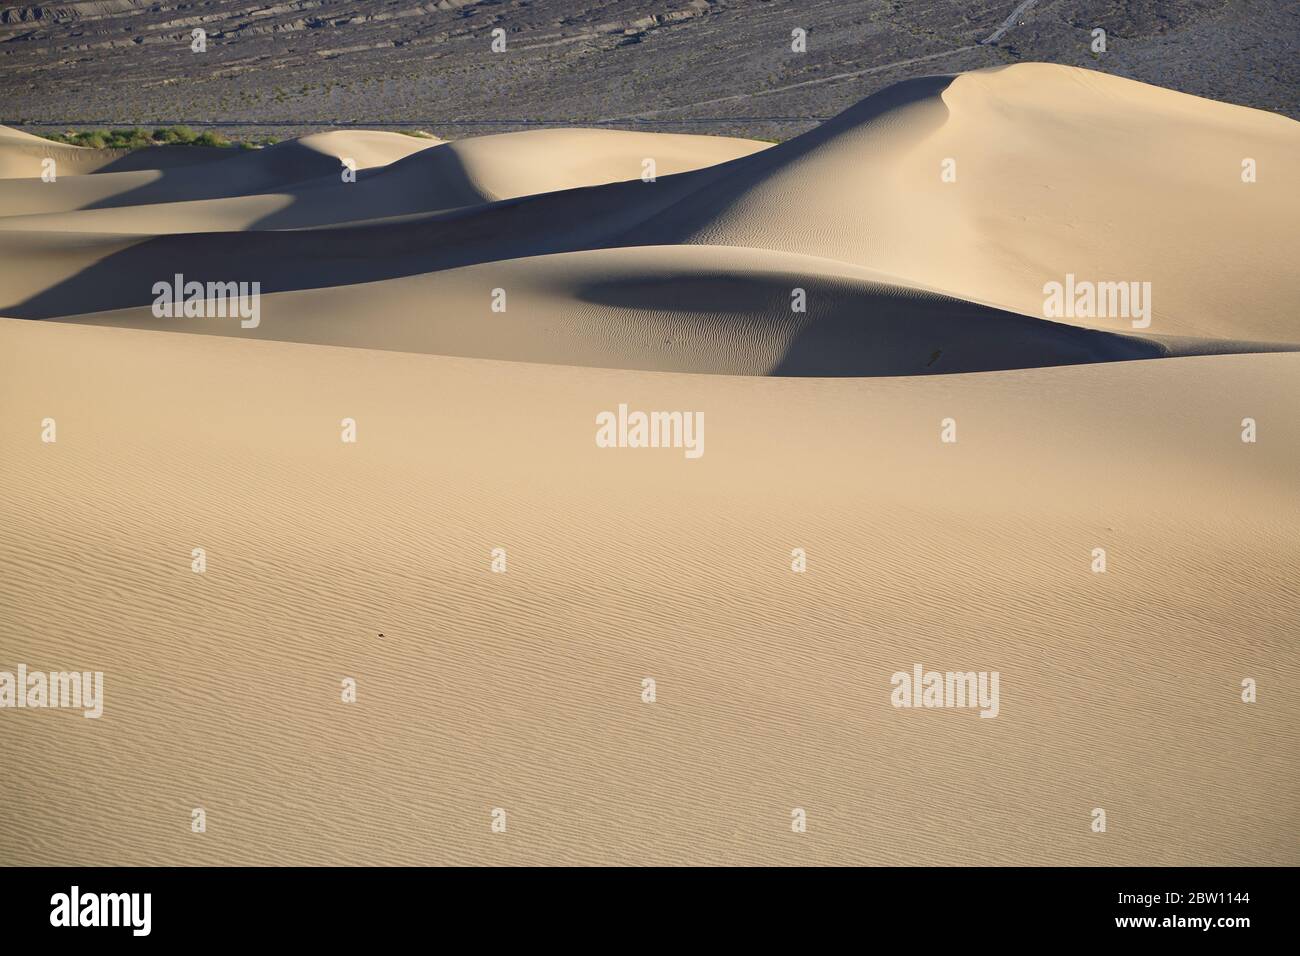 Mesquite Flats Sand Dunes, Stovepipe Wells, Death Valley National Park, California, USA Stock Photo